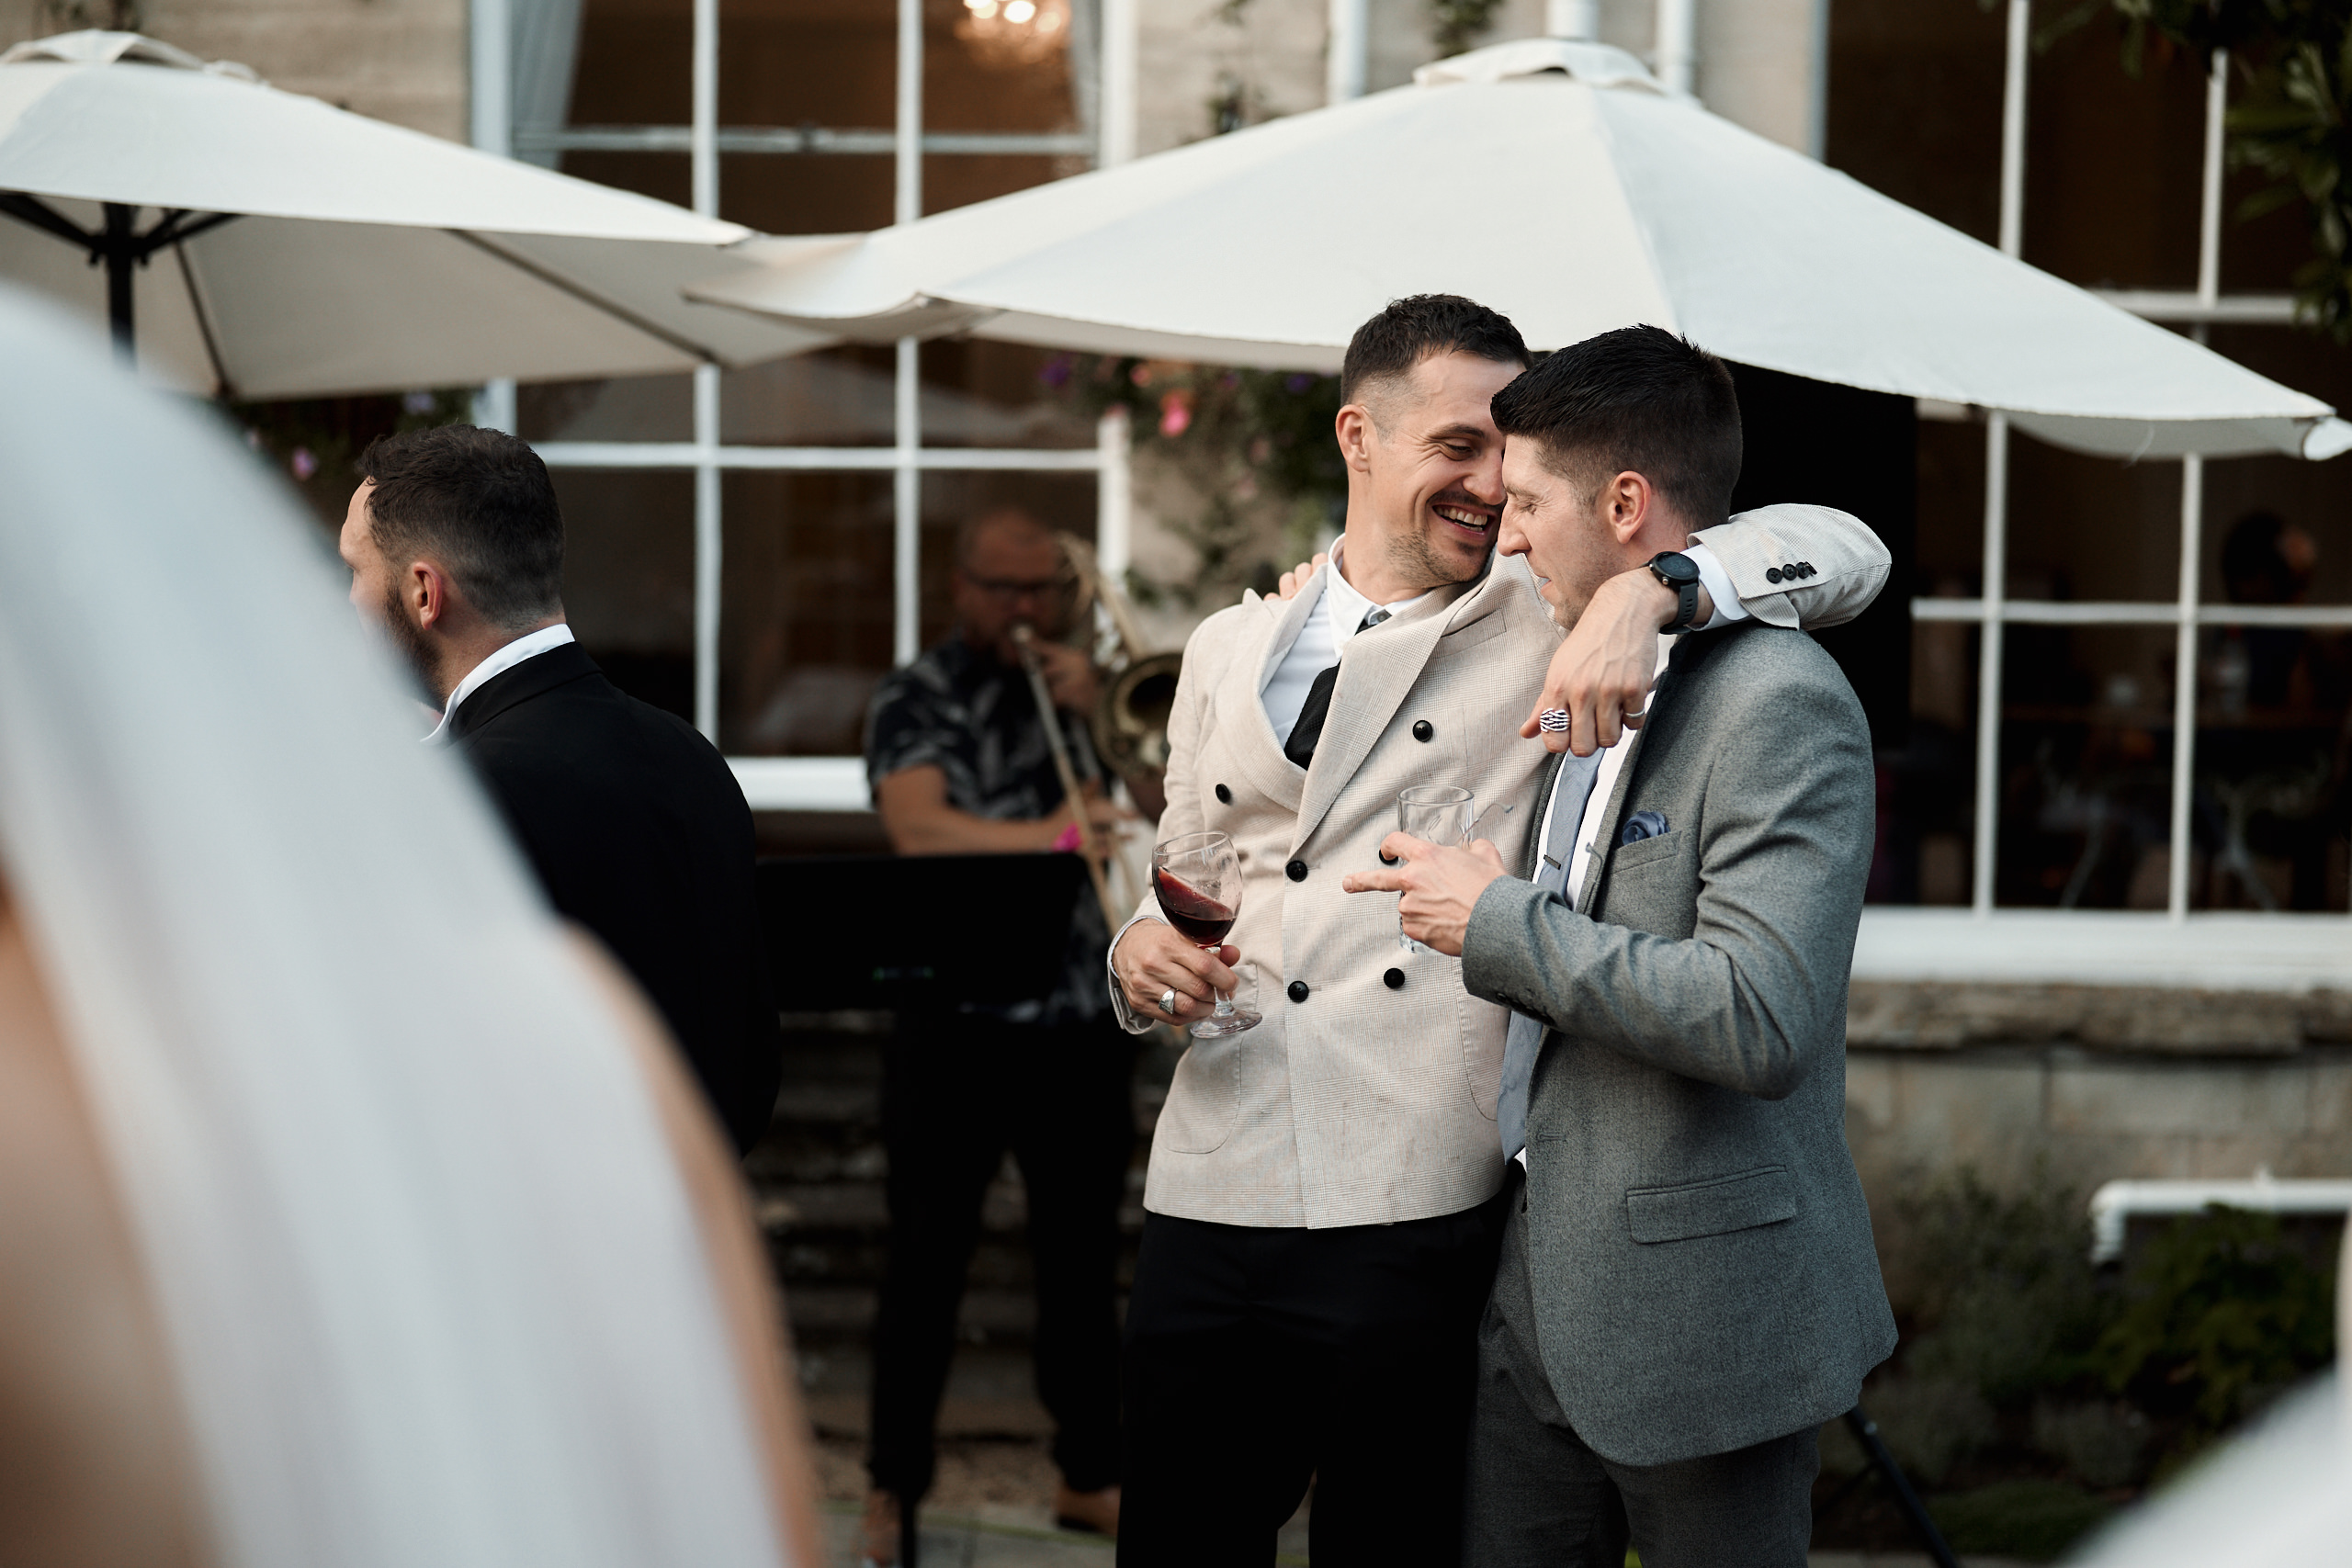 Two men hugging at a wedding reception.